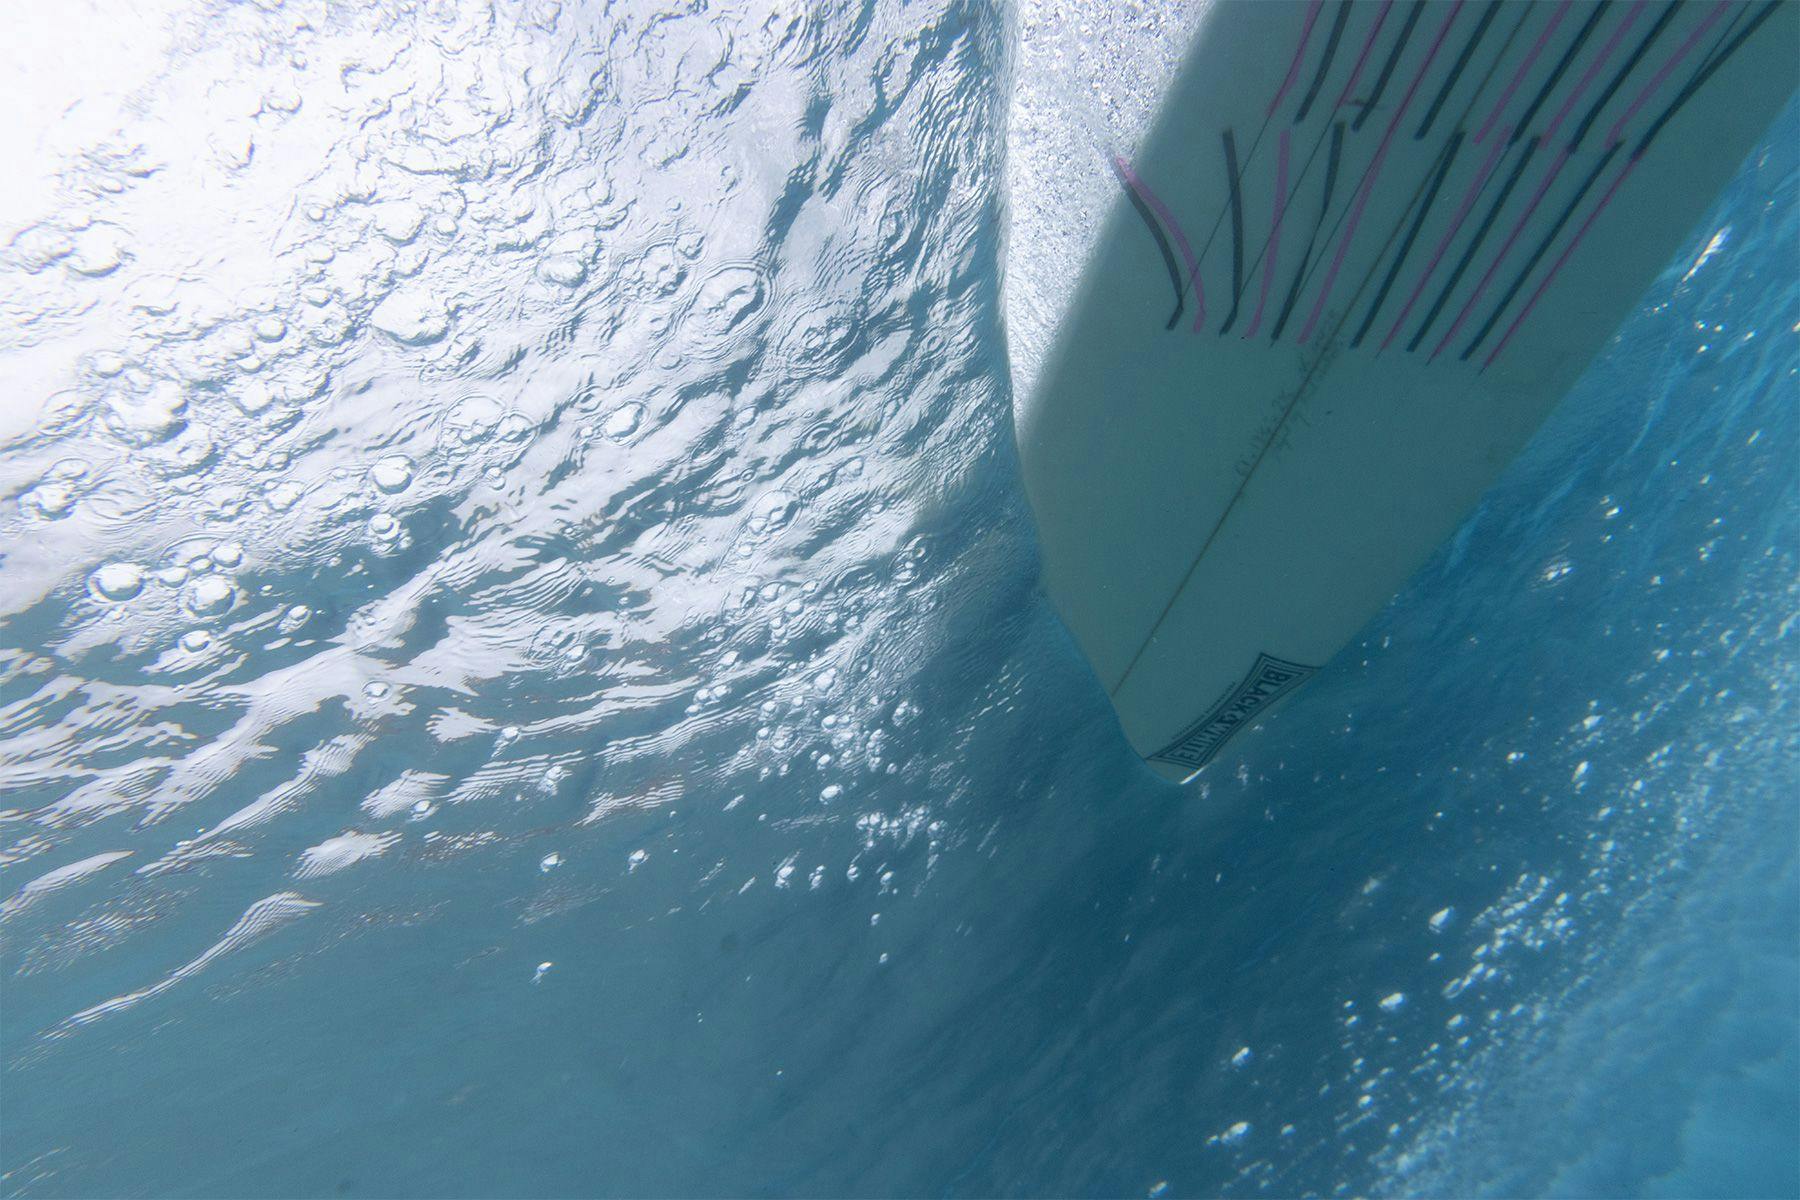 underwater photo showing the shear flow of water off the edge of the underside of a surfboard going along a wave